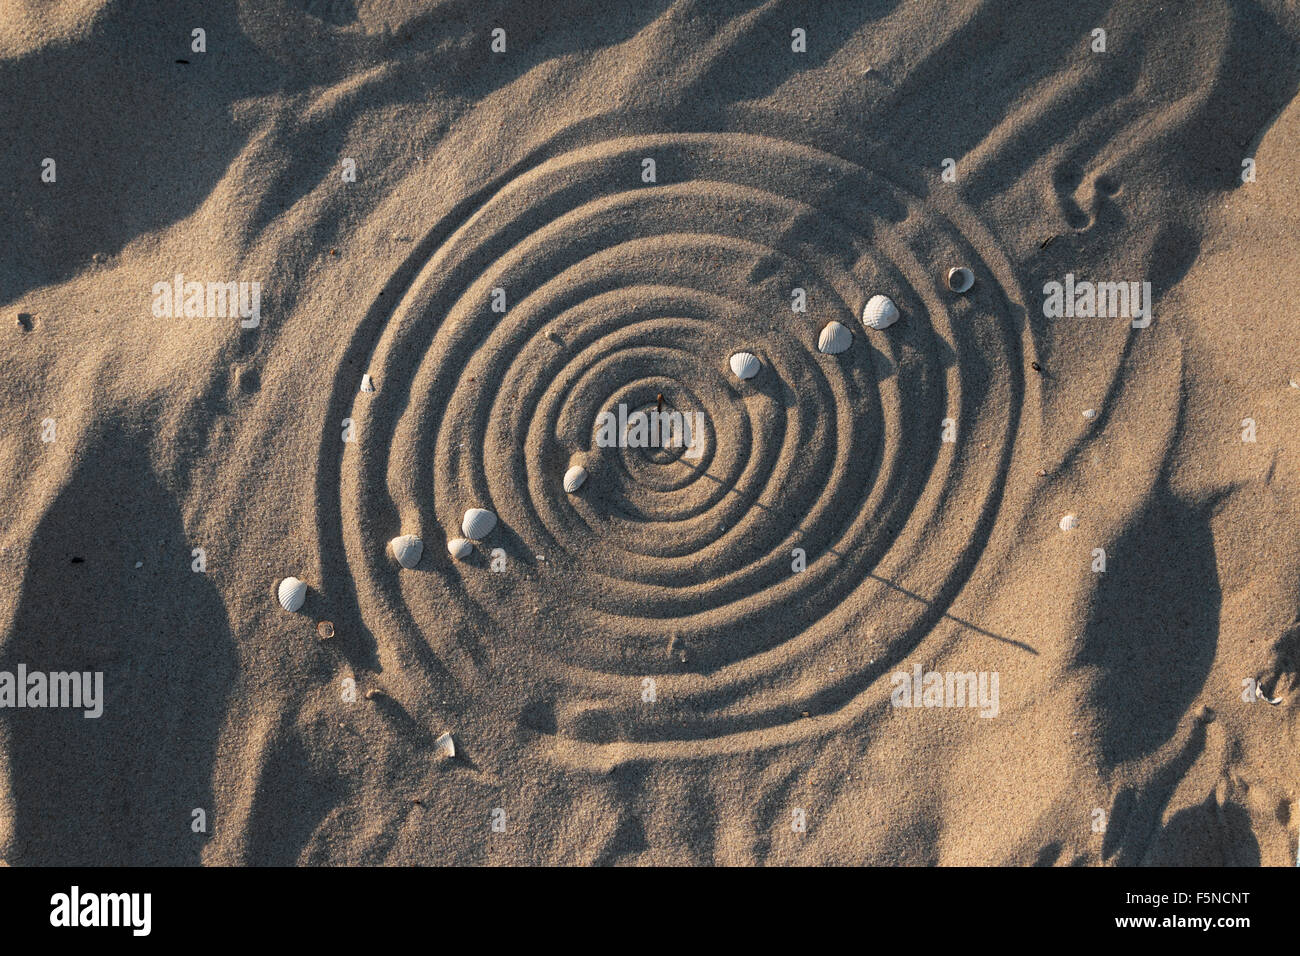 Conceptual sundial on the beach sand, as background Stock Photo